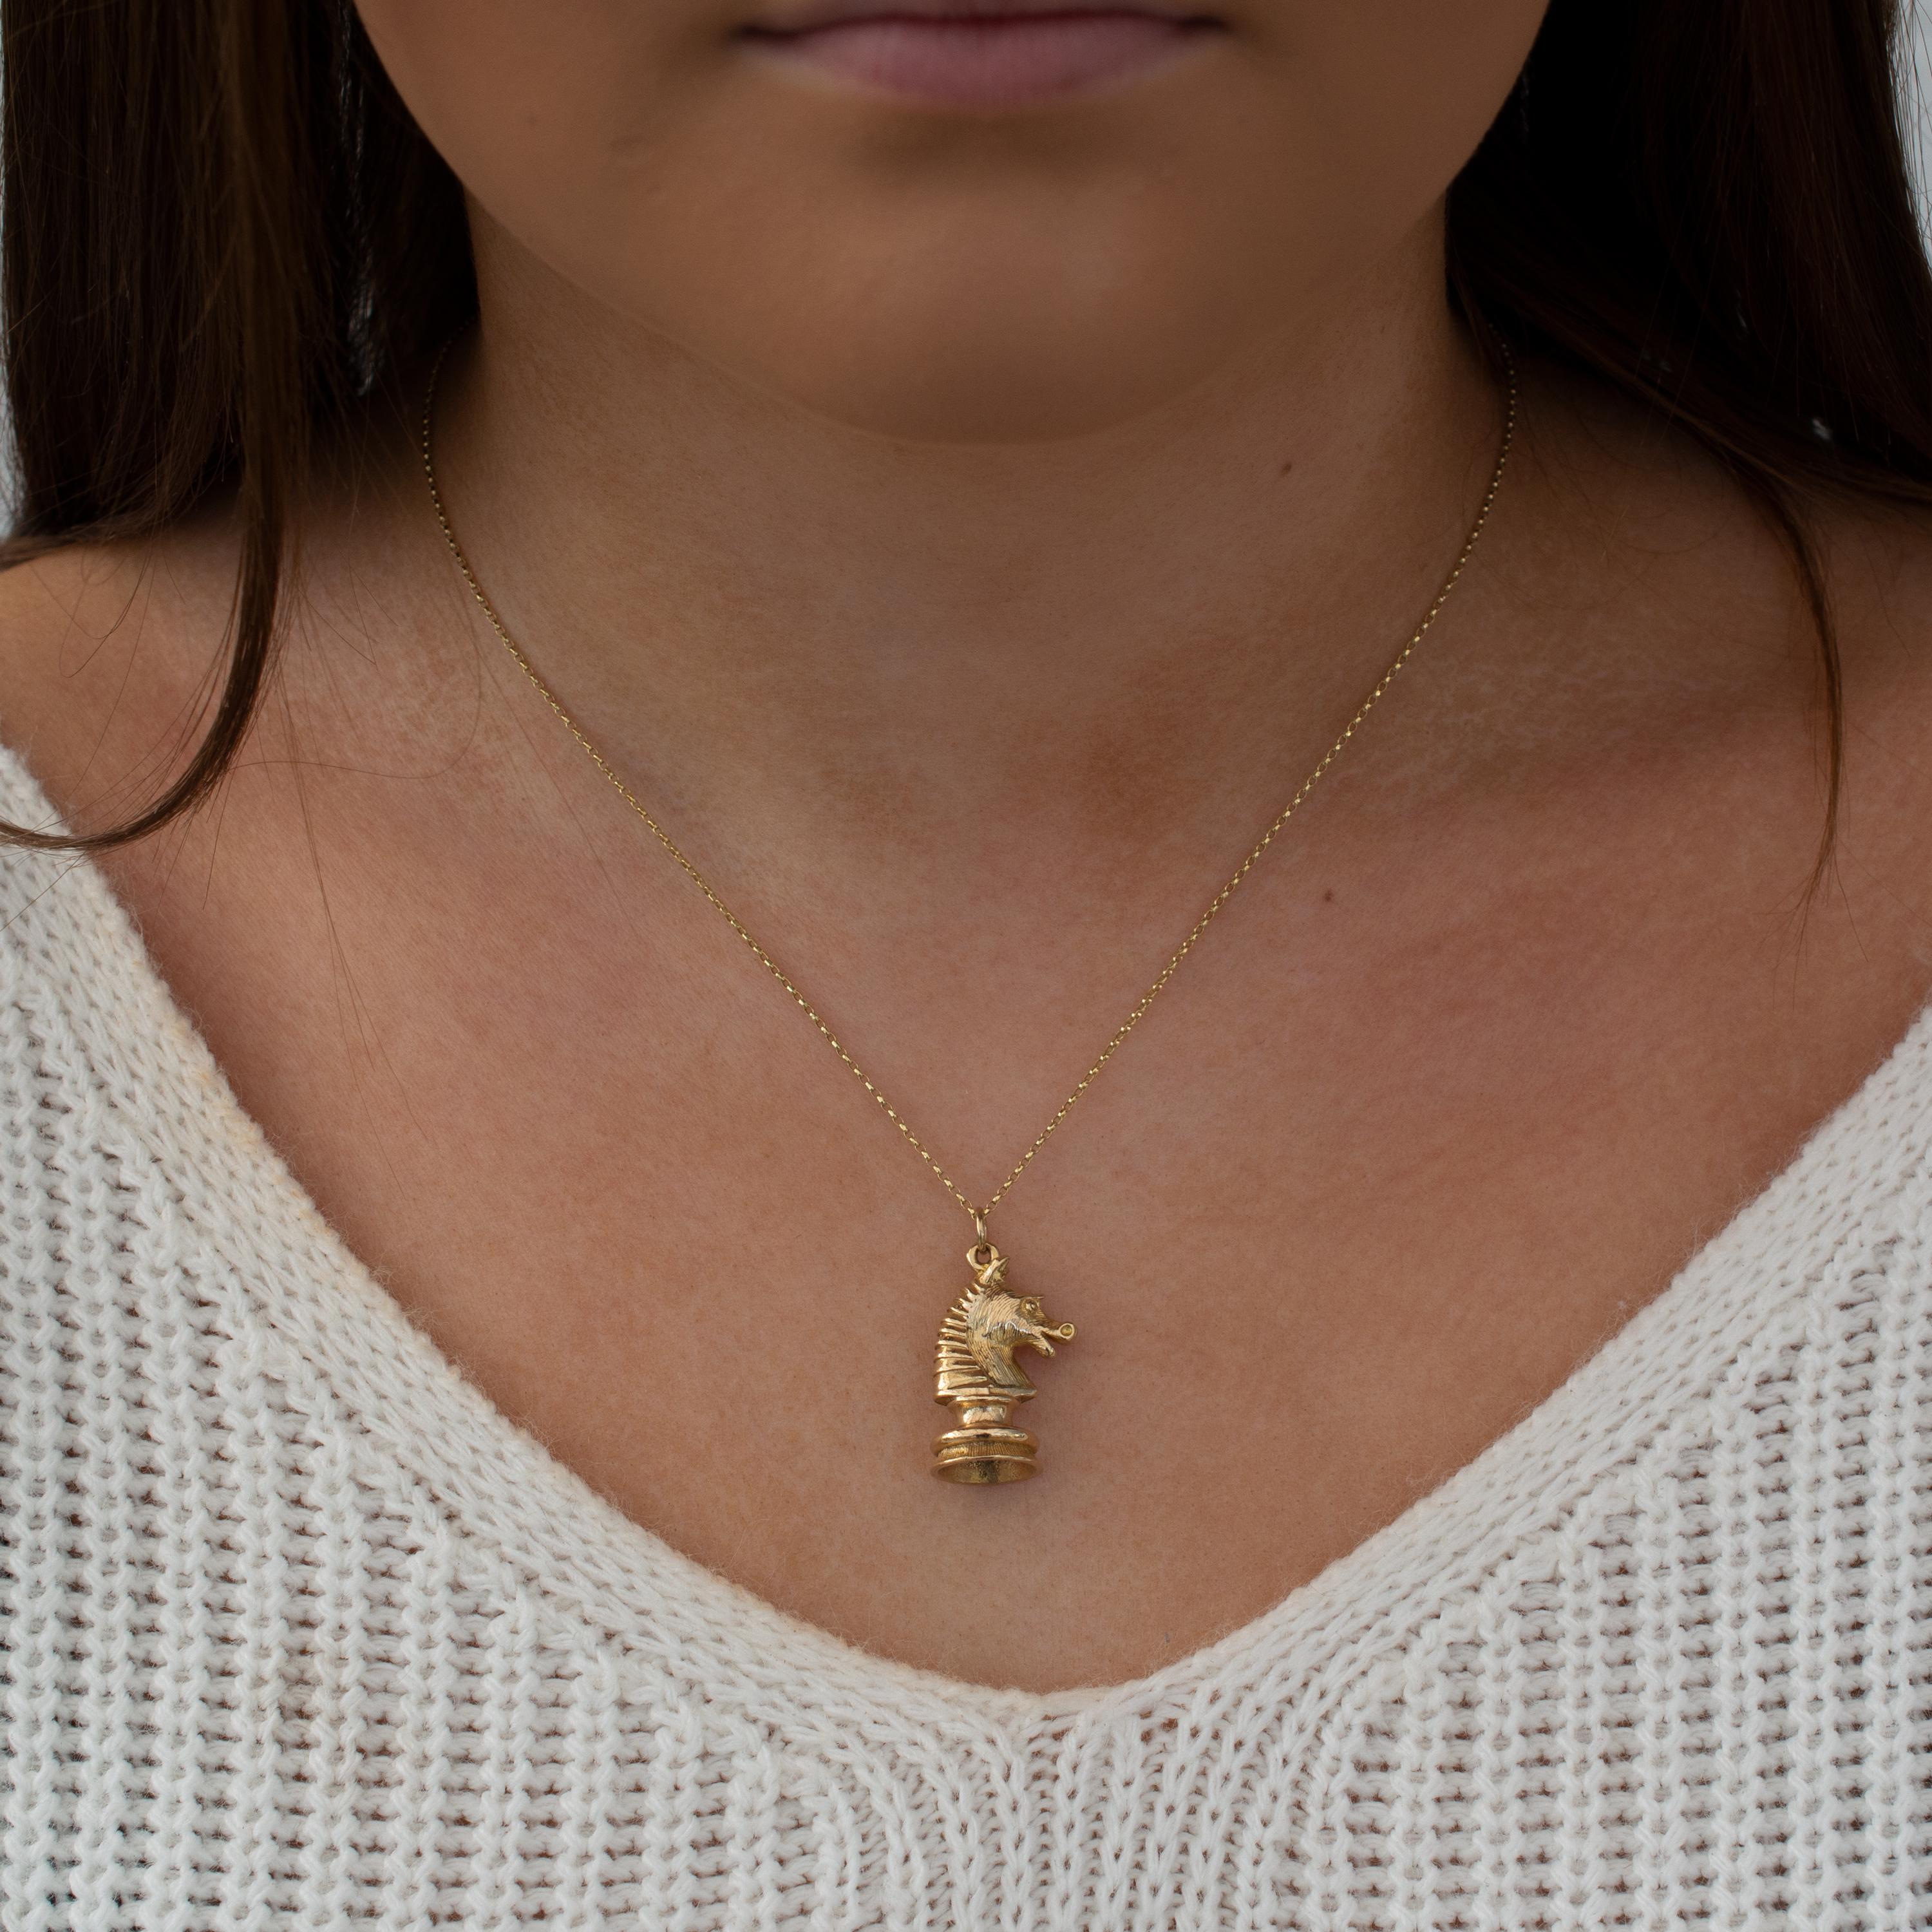 Women's Solid Gold Horse Knight Chess Piece Pendant Necklace, Hallmarked London 1971